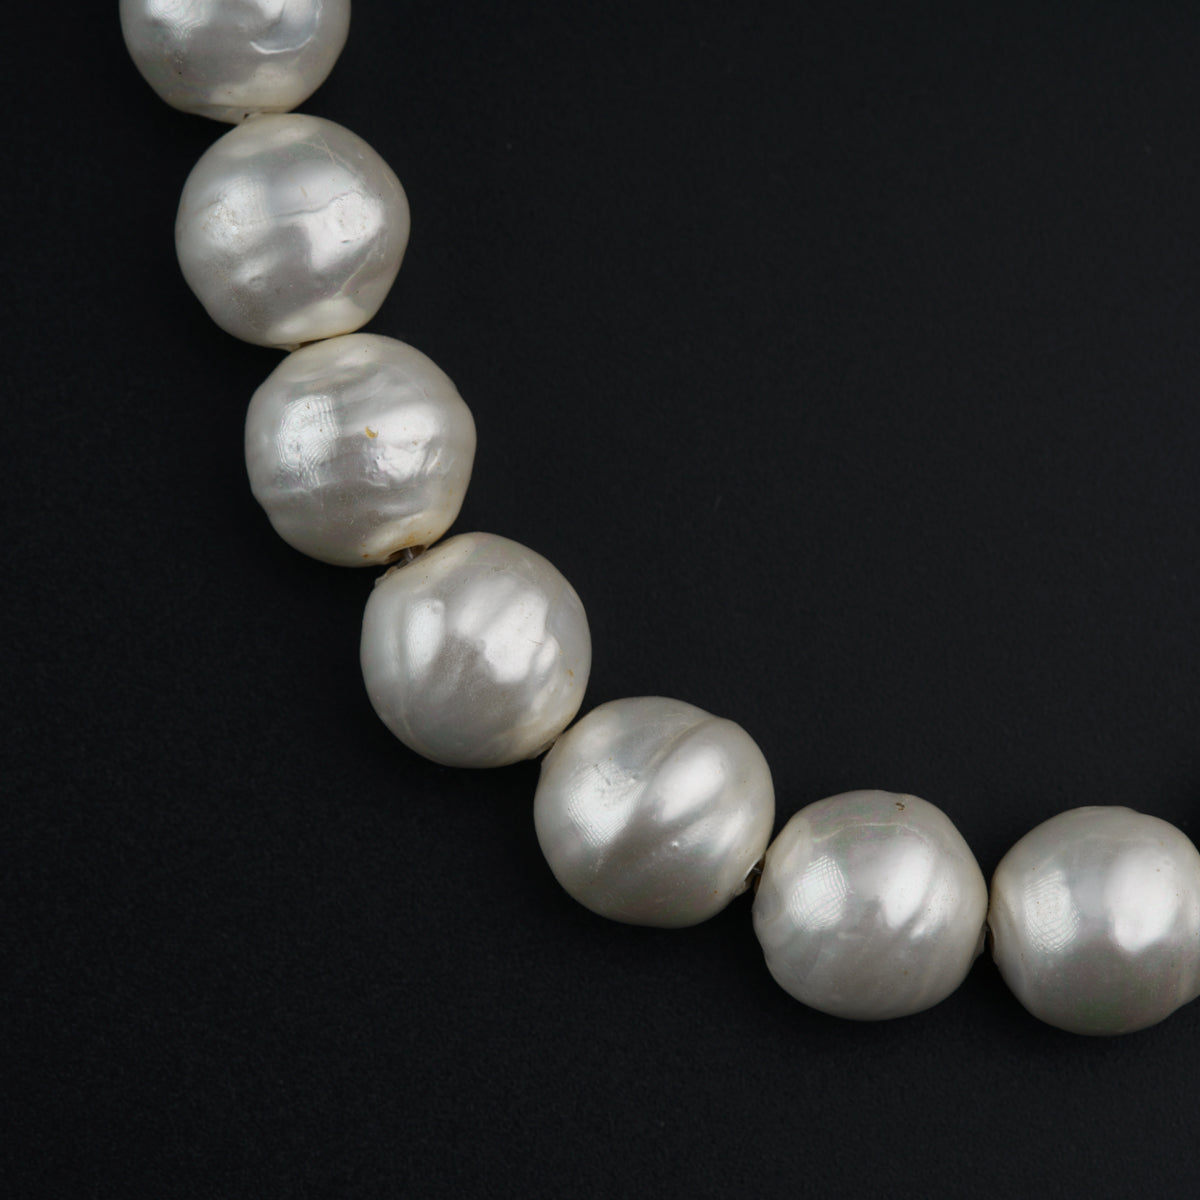 a necklace of white pearls on a black background